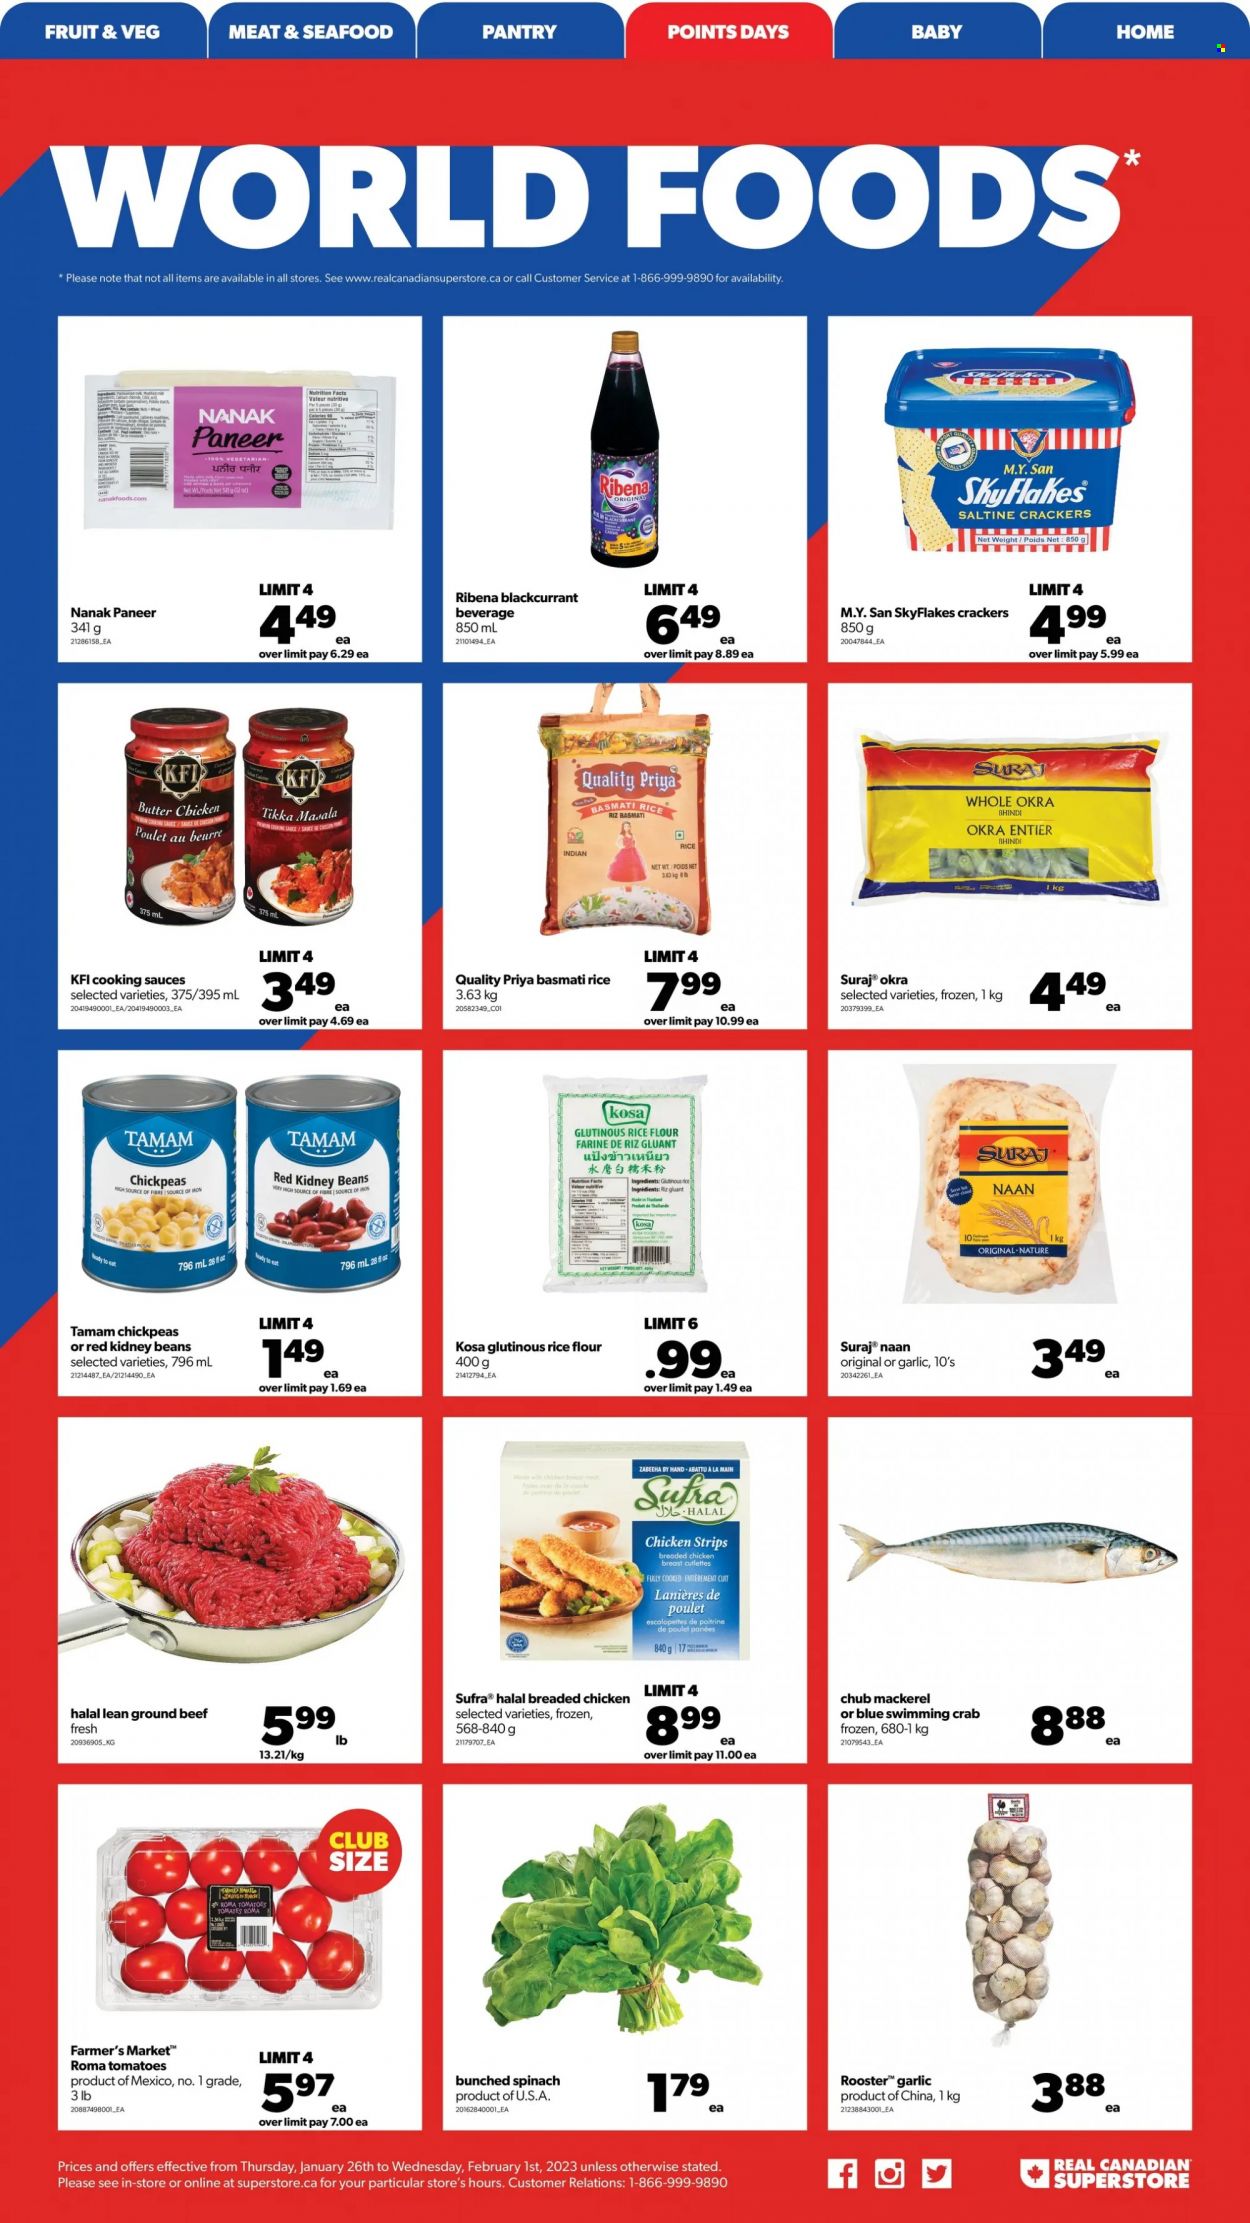 thumbnail - Real Canadian Superstore Flyer - January 26, 2023 - February 01, 2023 - Sales products - beans, garlic, spinach, tomatoes, mackerel, seafood, crab, fried chicken, Tikka Masala, paneer, strips, chicken strips, crackers, Skyflakes, flour, rice flour, kidney beans, Priya, basmati rice, chickpeas, chicken, beef meat, ground beef. Page 11.